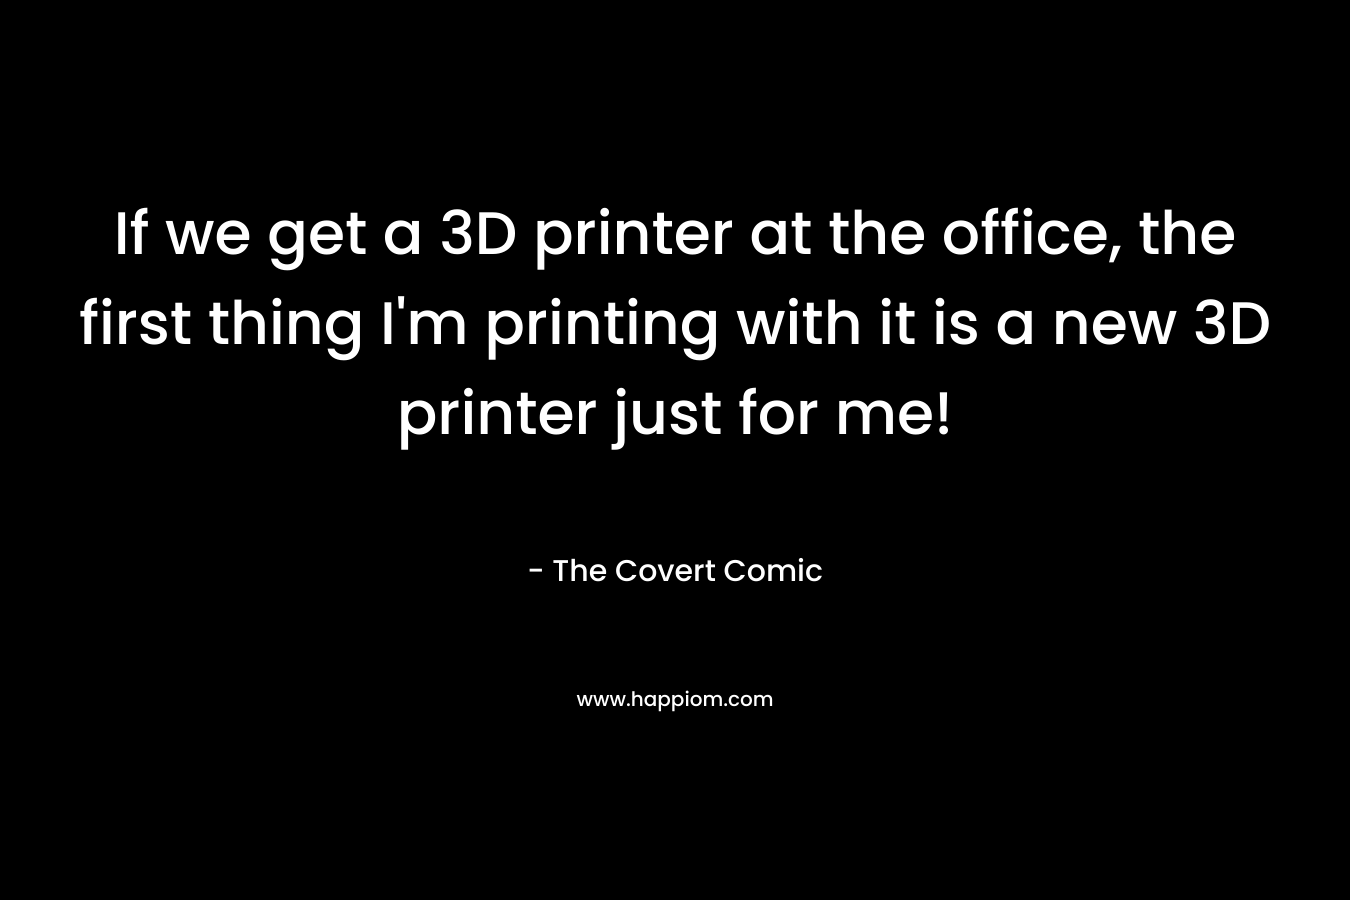 If we get a 3D printer at the office, the first thing I’m printing with it is a new 3D printer just for me! – The Covert Comic